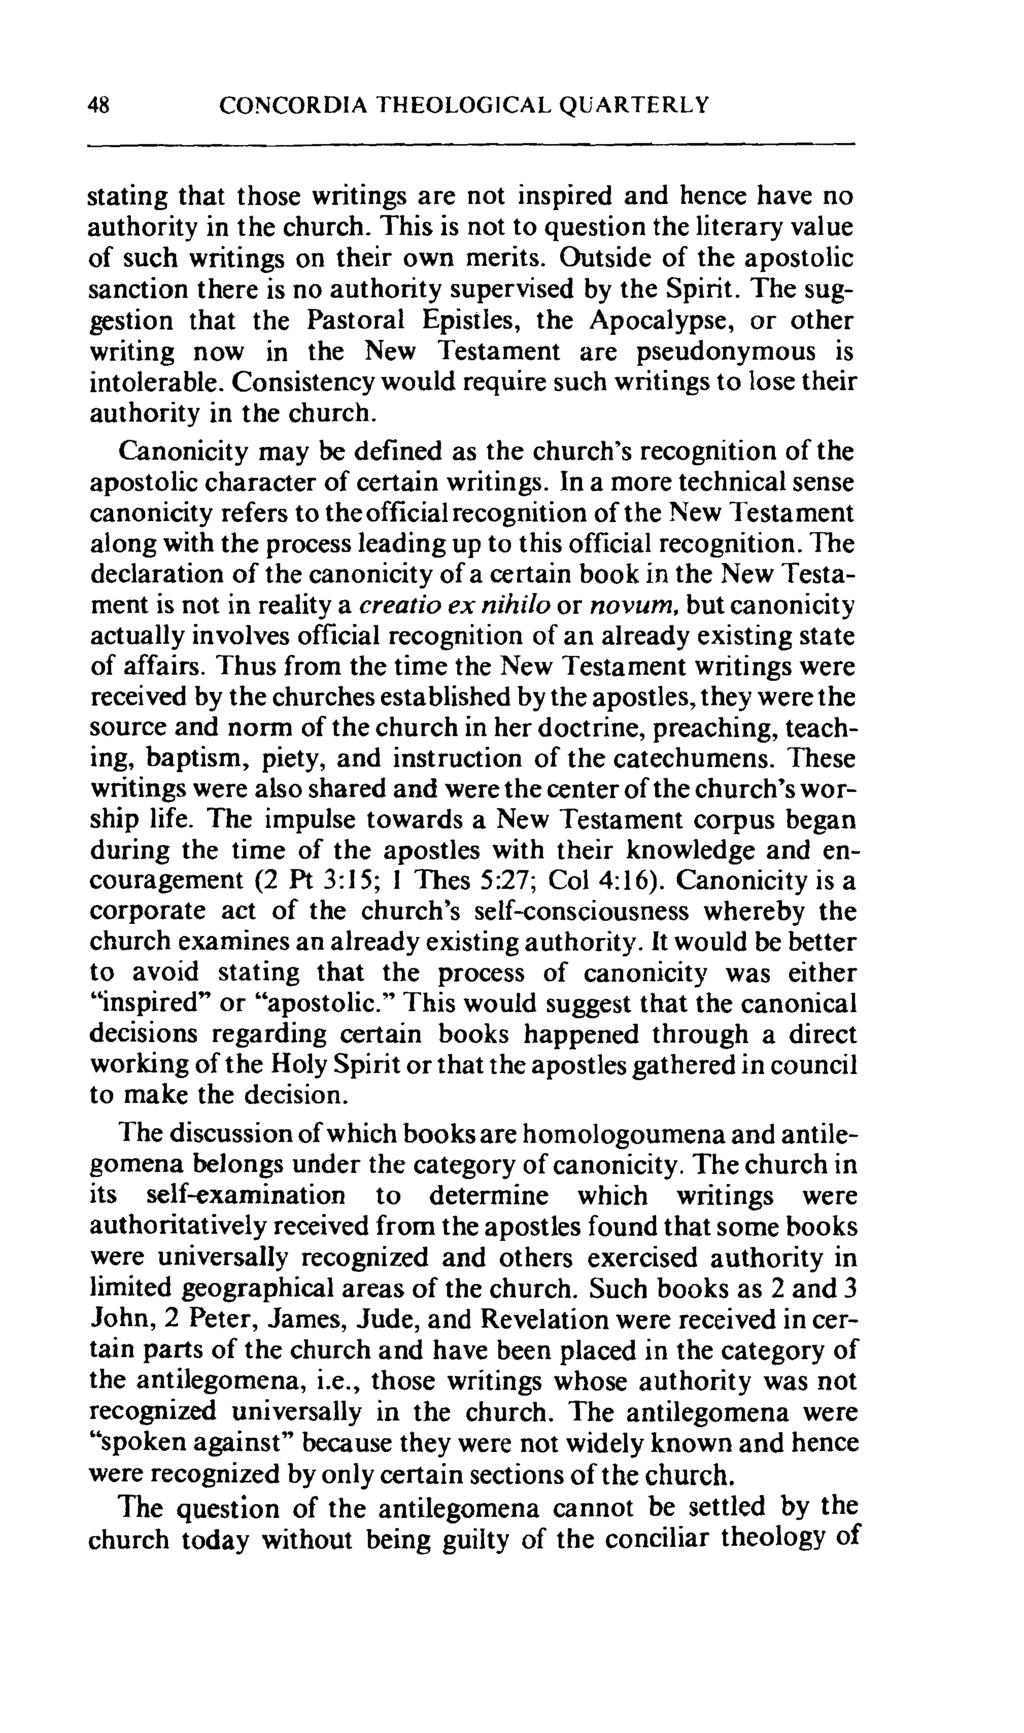 48 CONCORDIA THEOLOGICAL QUARTERLY stating that those writings are not inspired and hence have no authority in the church.